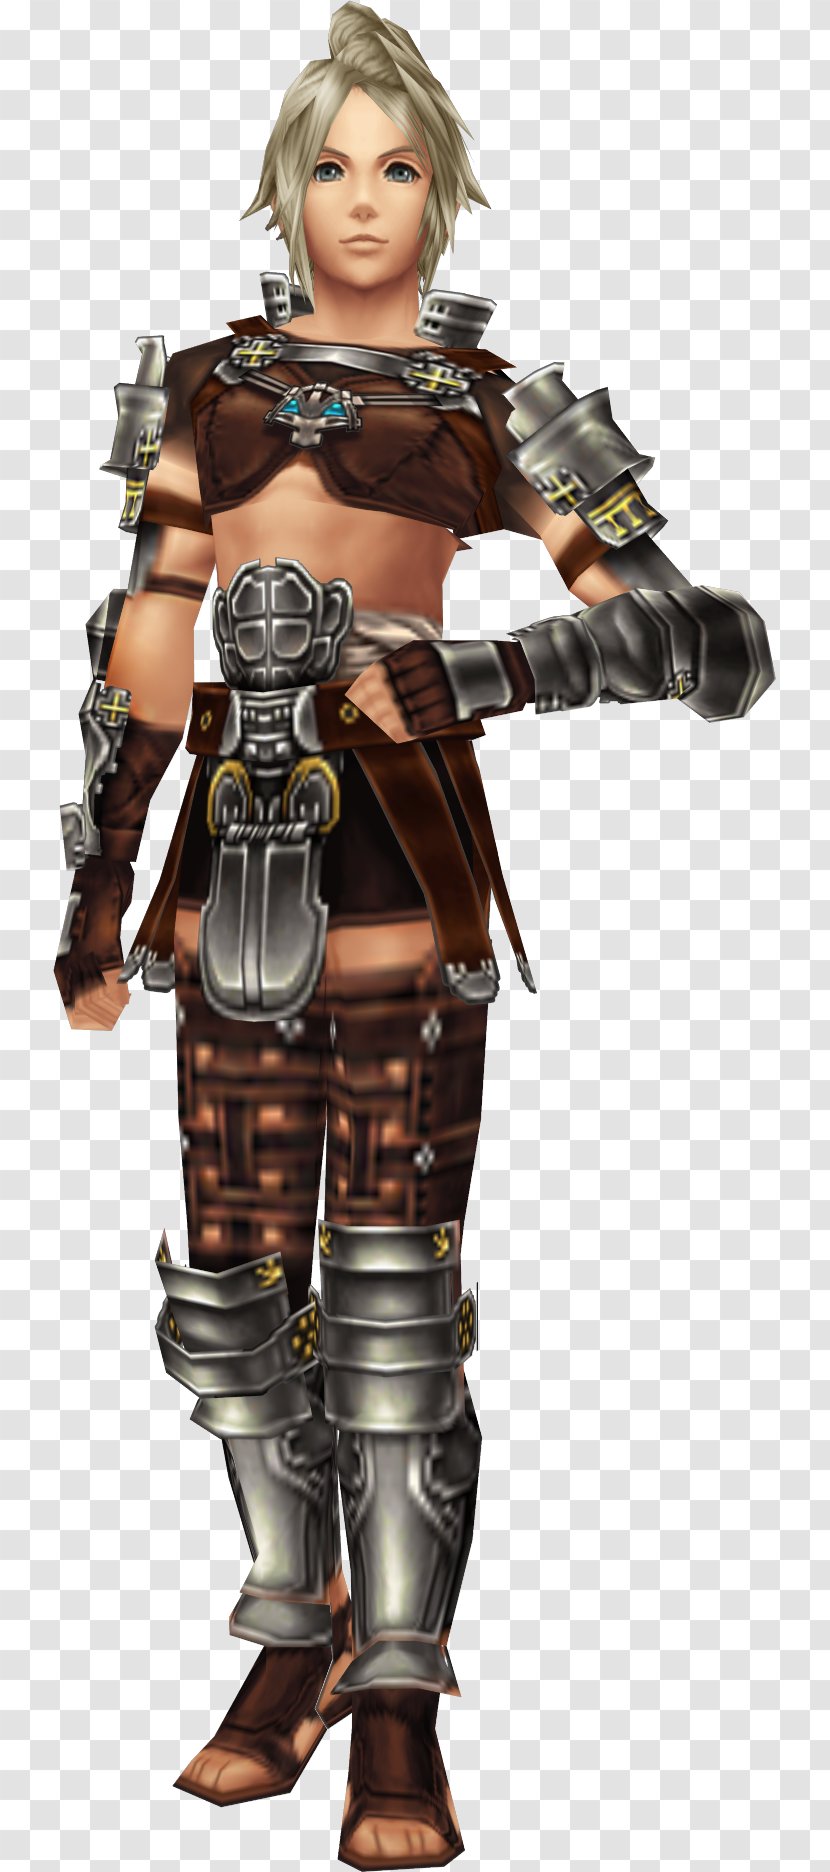 Dissidia 012 Final Fantasy XII Armour Gabranth - Weapon Transparent PNG